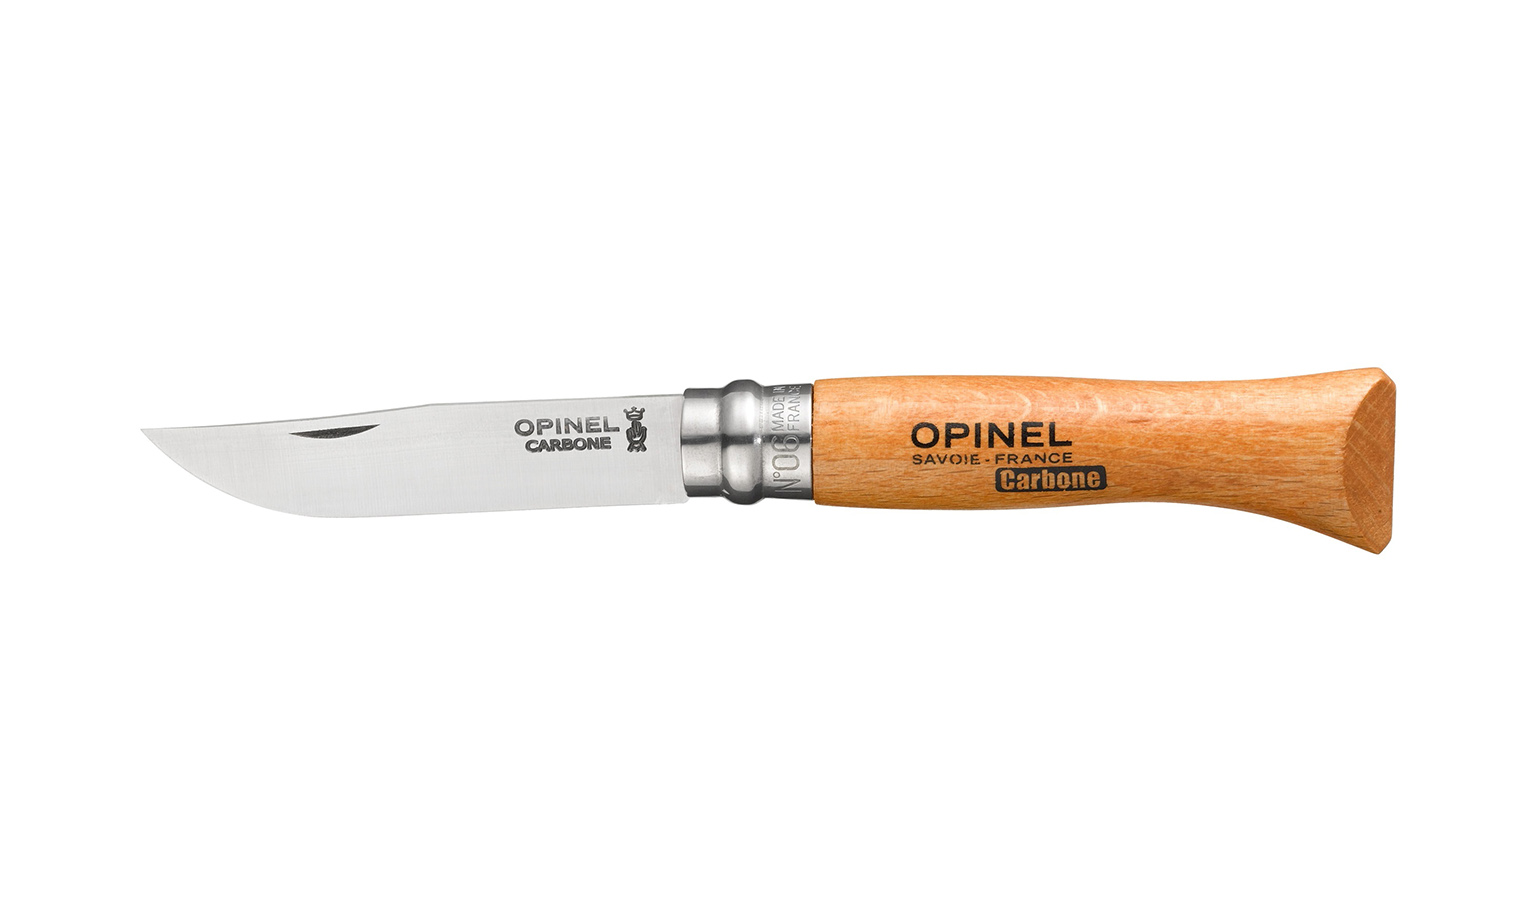 COUTEAU OPINEL CARBONE N° 6 7 8 9 TAILLE AU CHOIX NEUF 